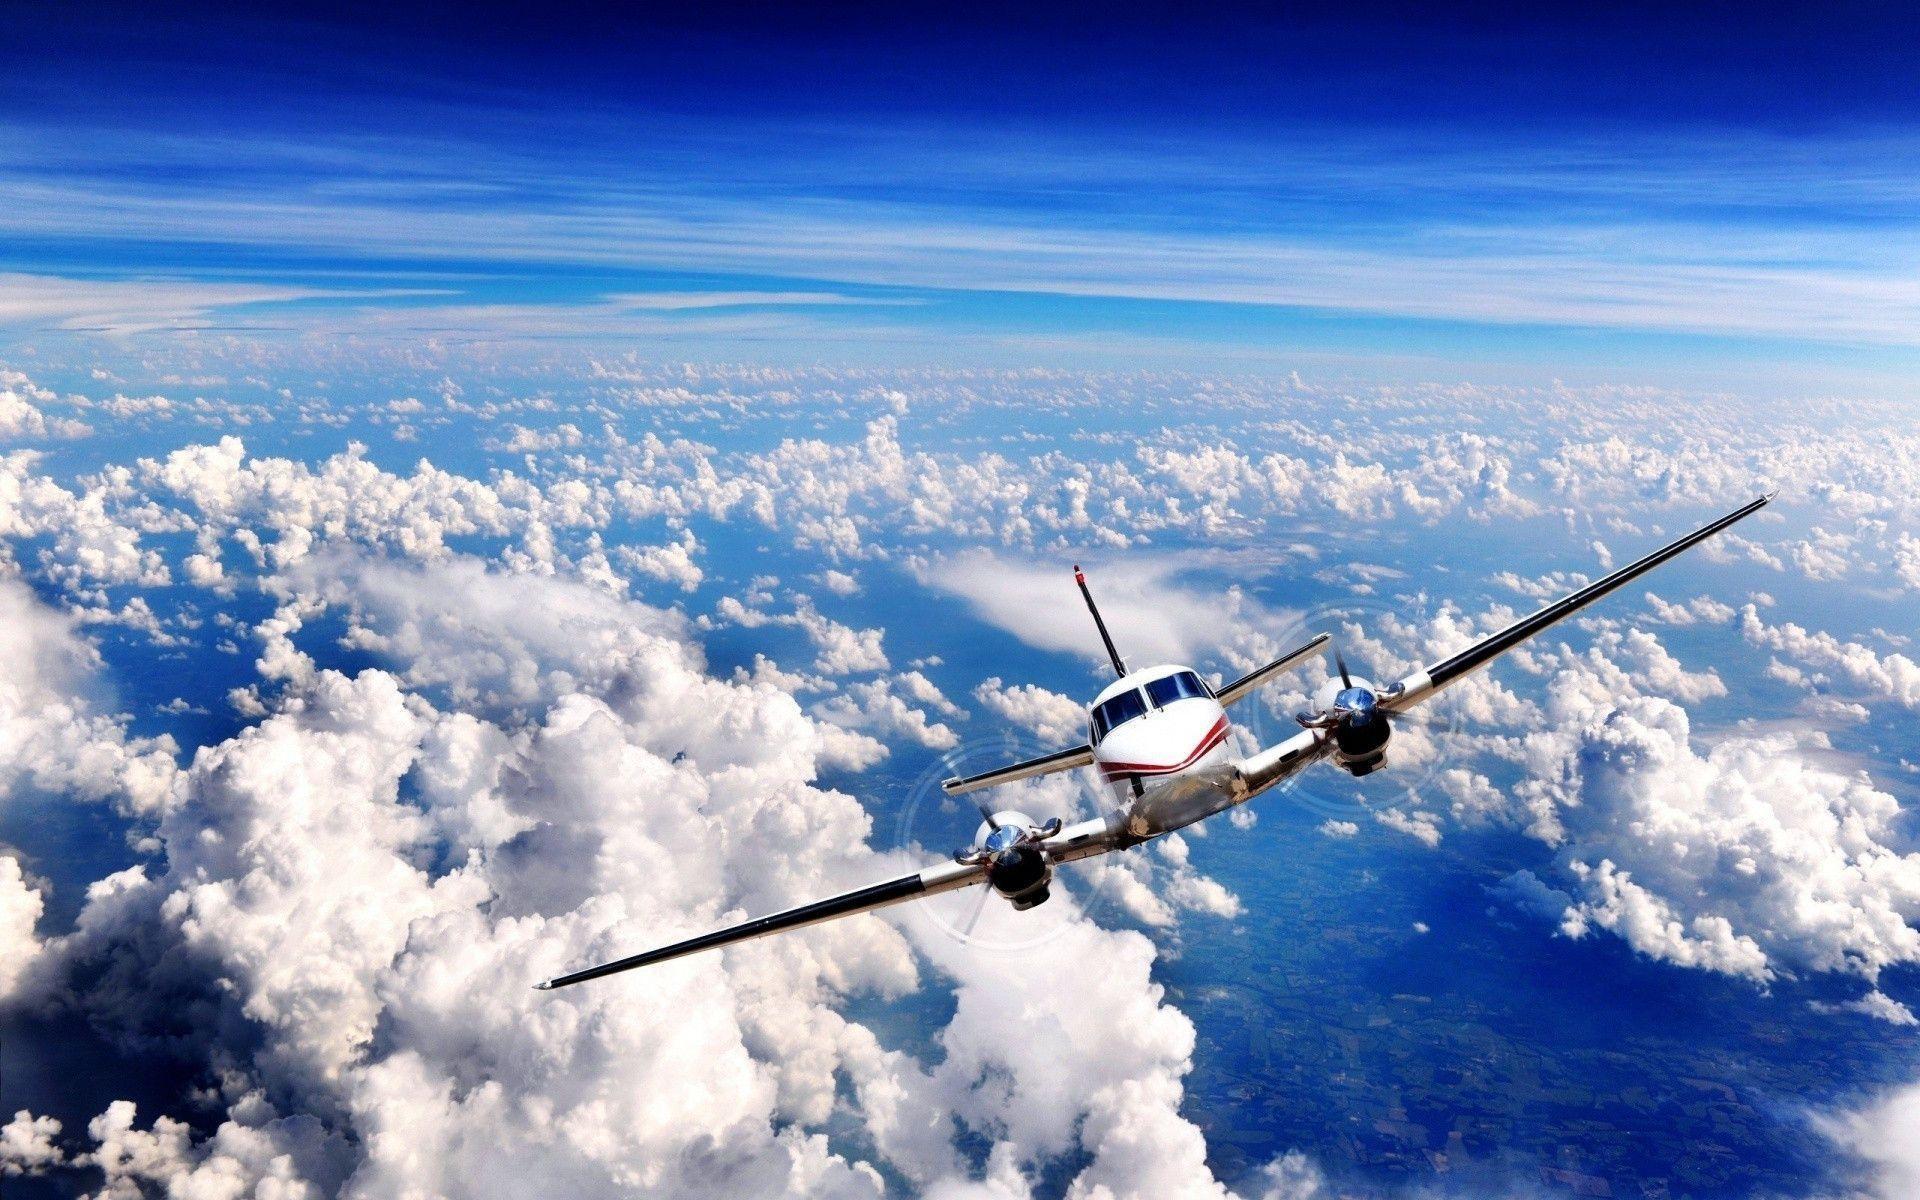 Airplane in Clouds Wallpaper